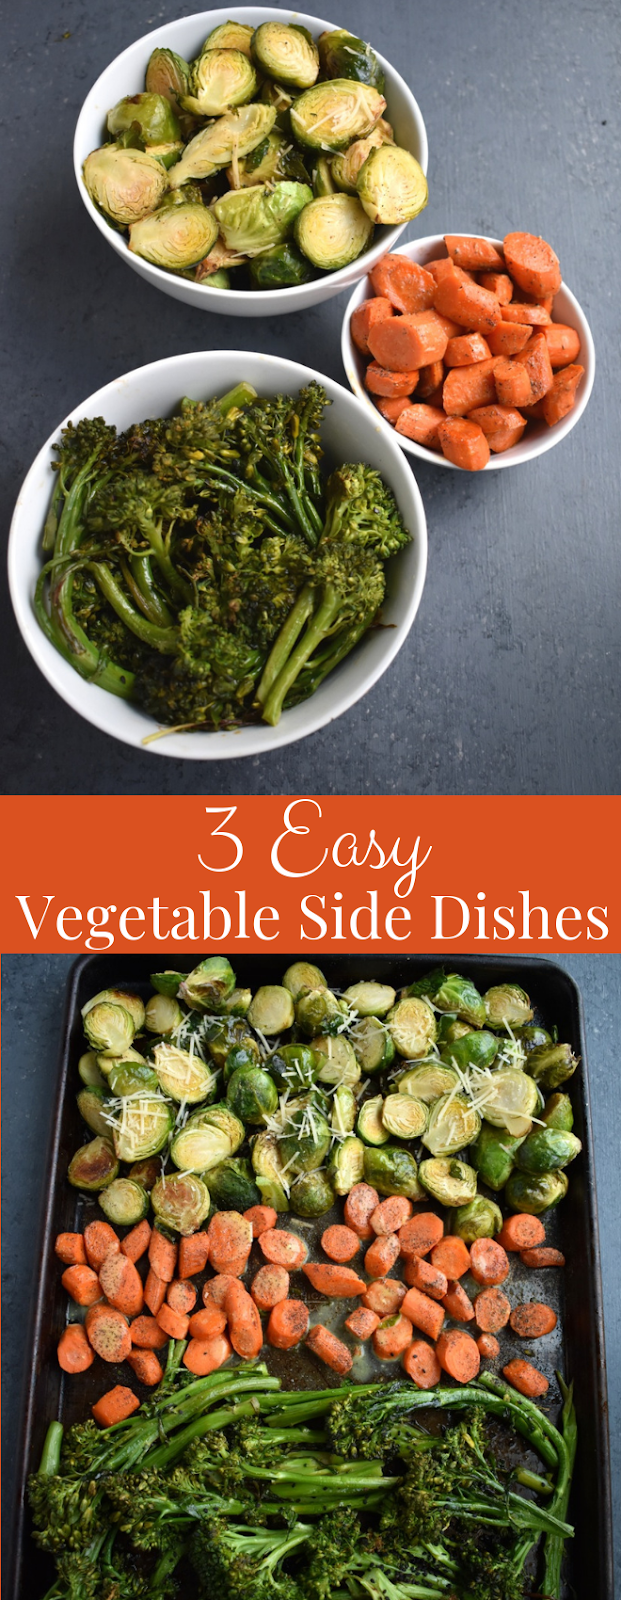 3 Easy Vegetable Side Dishes are perfect when you need a quick healthy side dish! These include Asian Roasted Broccoli, Dijon Roasted Carrots and Garlic, Lemon Parmesan Brussels Sprouts. www.nutritionistreviews.com #vegetable #vegetables #healthy #sidedish #holidays #thanksgiving #christmas